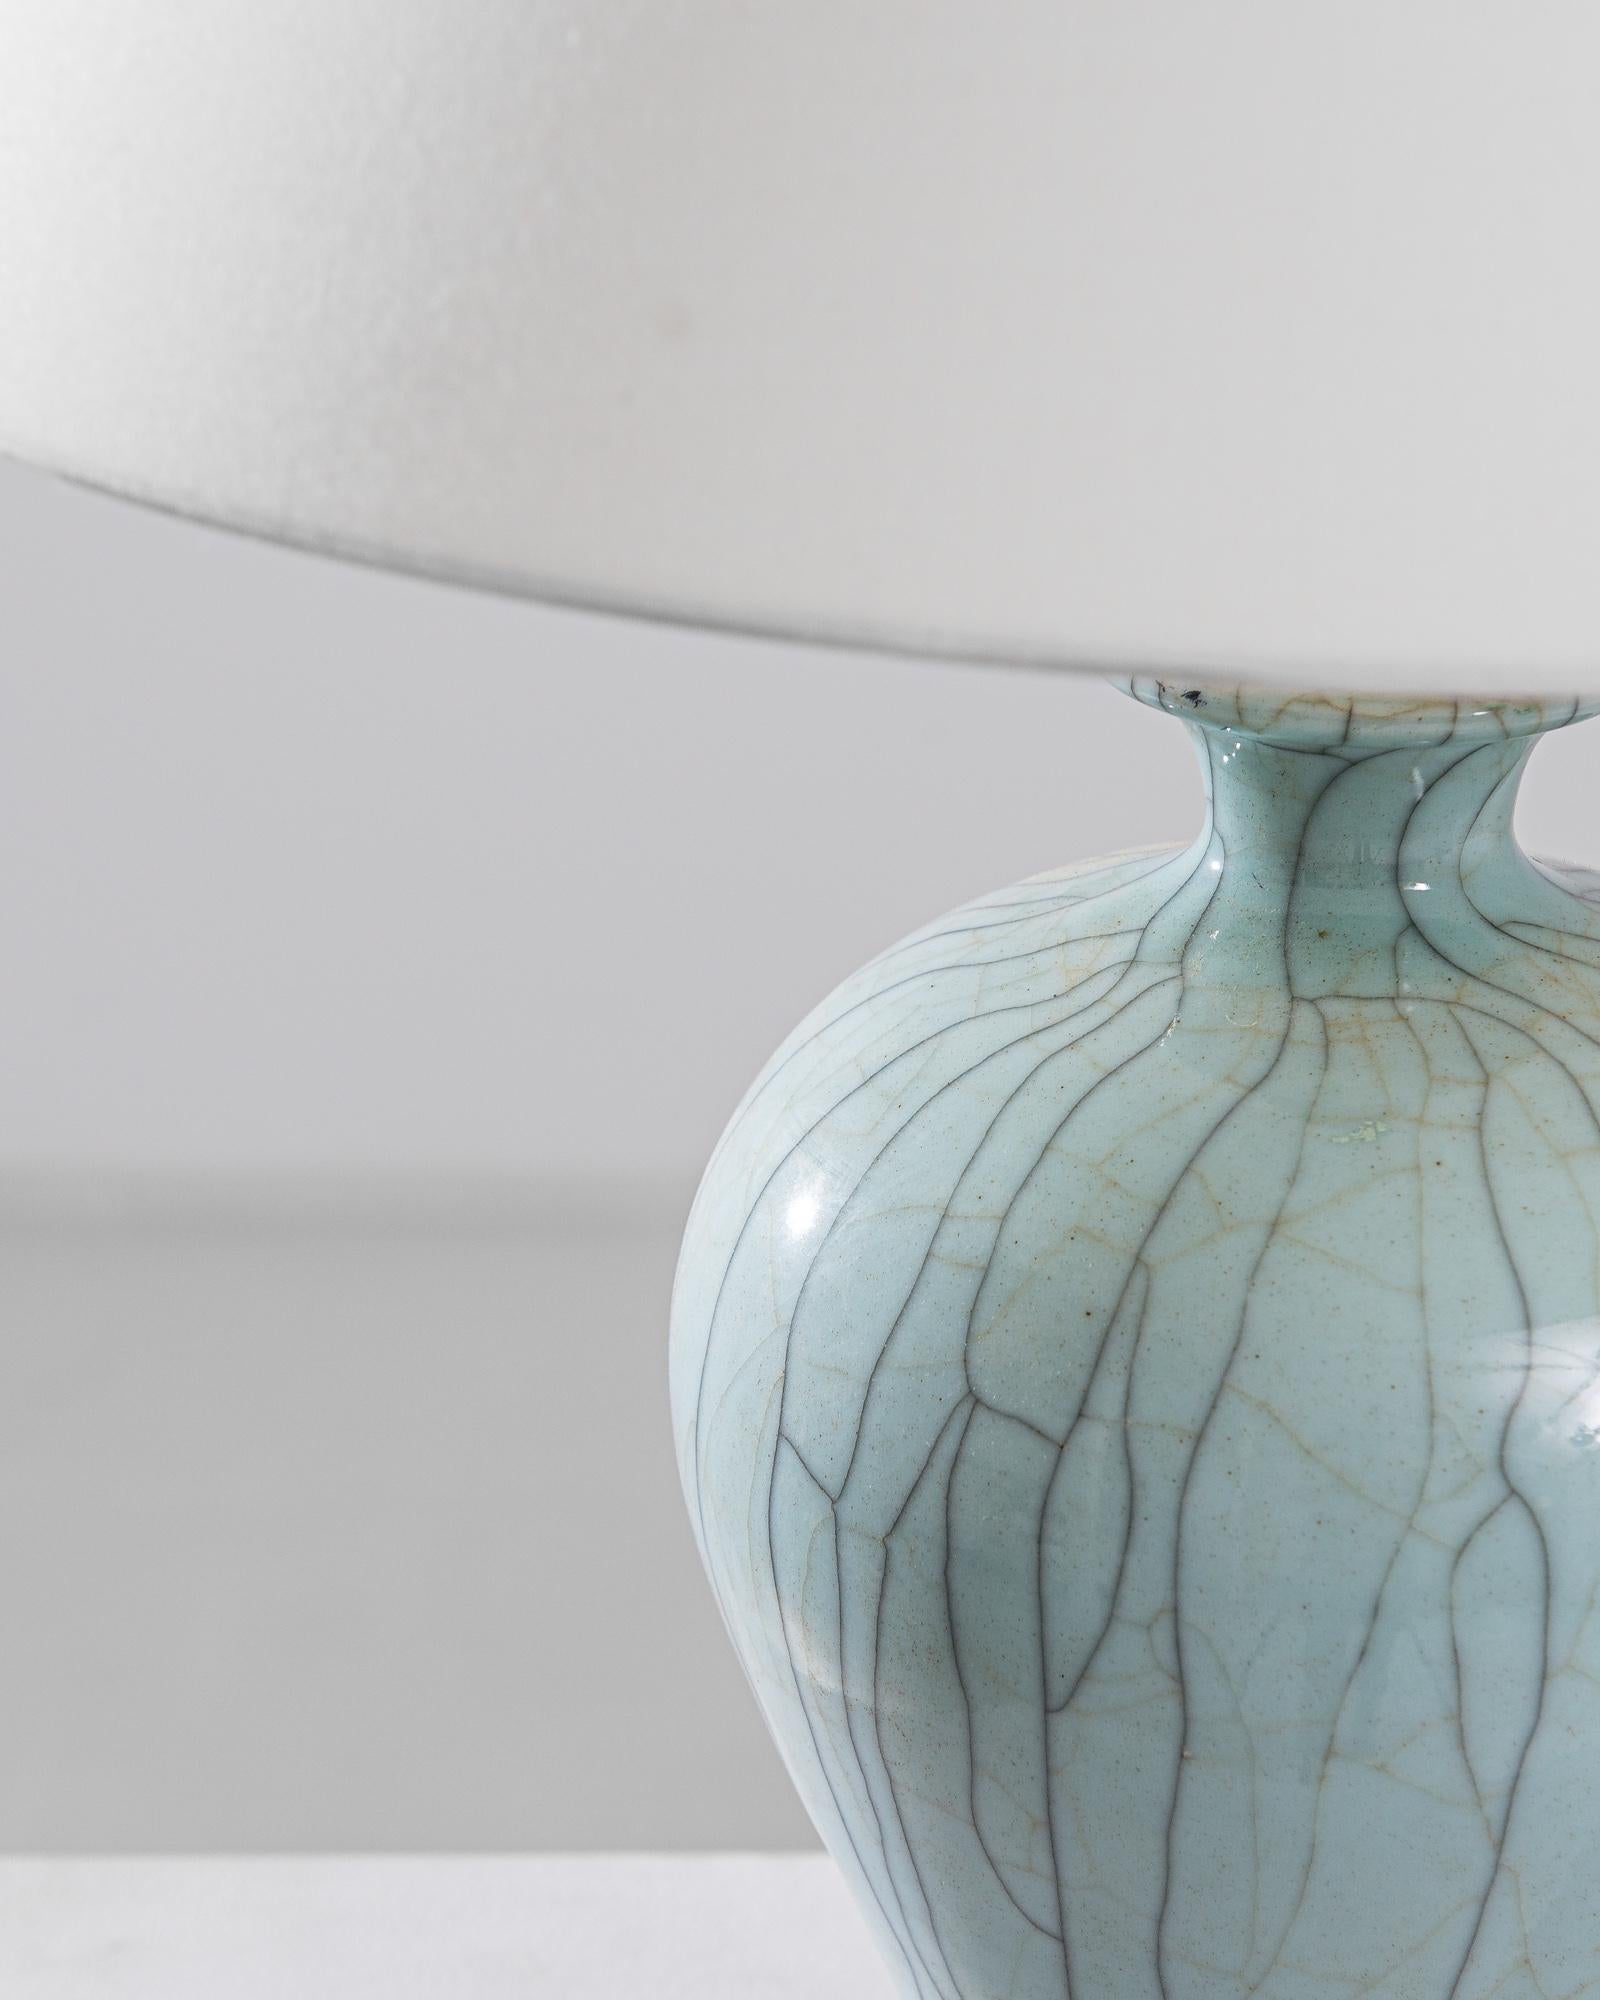 An exceptional find to inspire your collection. This vintage Chinese “plum vase” has been adapted into a beautiful table lamp. Polished brass meets a beautiful celadon crackle glaze, enlightening your space with an uncompromising contrast. The